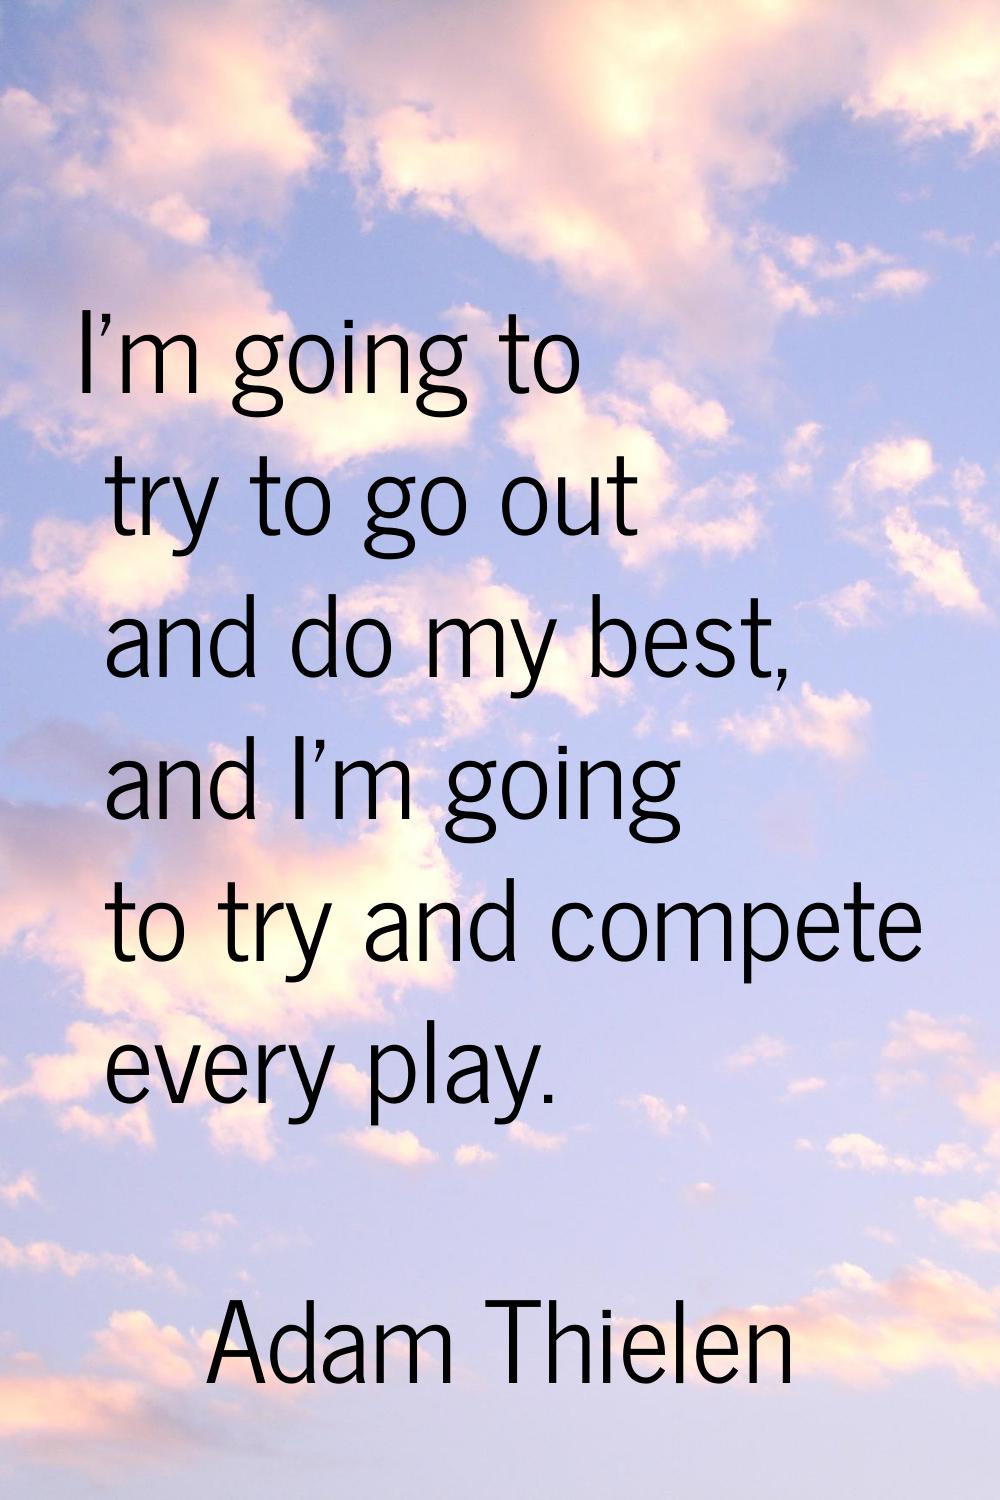 I'm going to try to go out and do my best, and I'm going to try and compete every play.